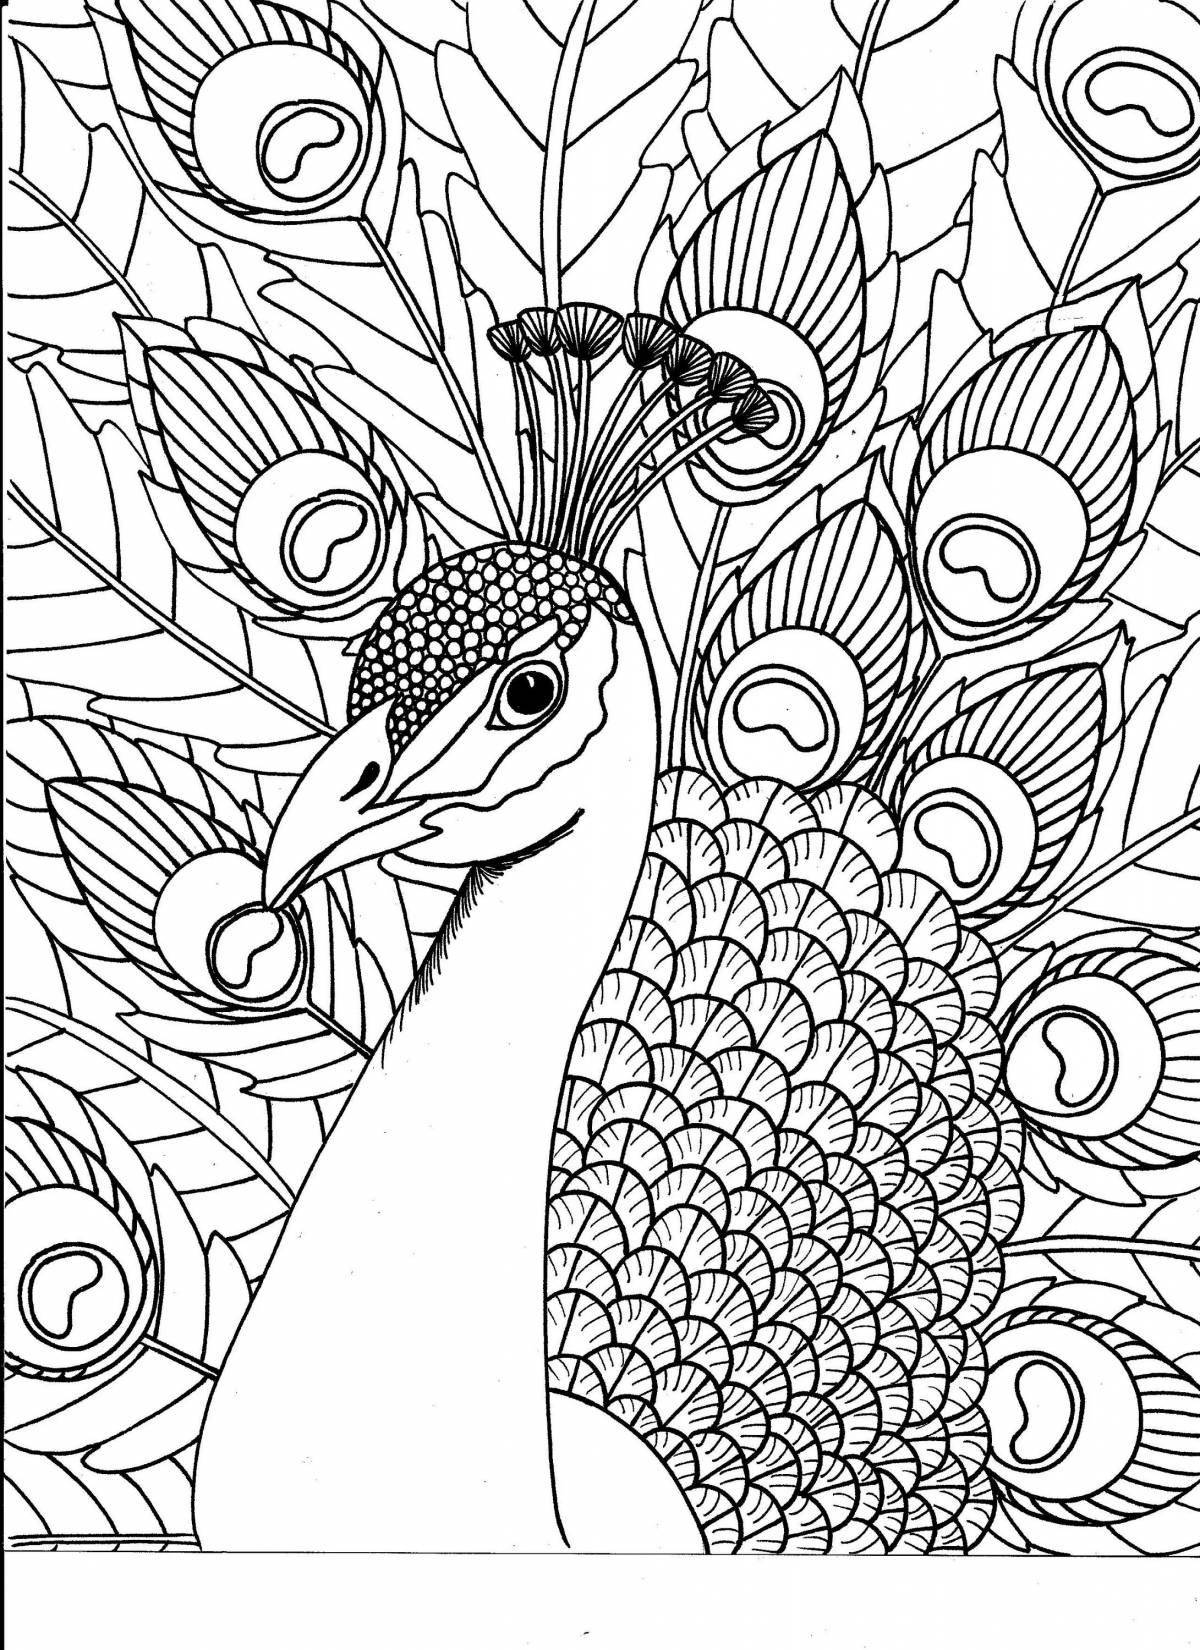 Violent peacock coloring by numbers